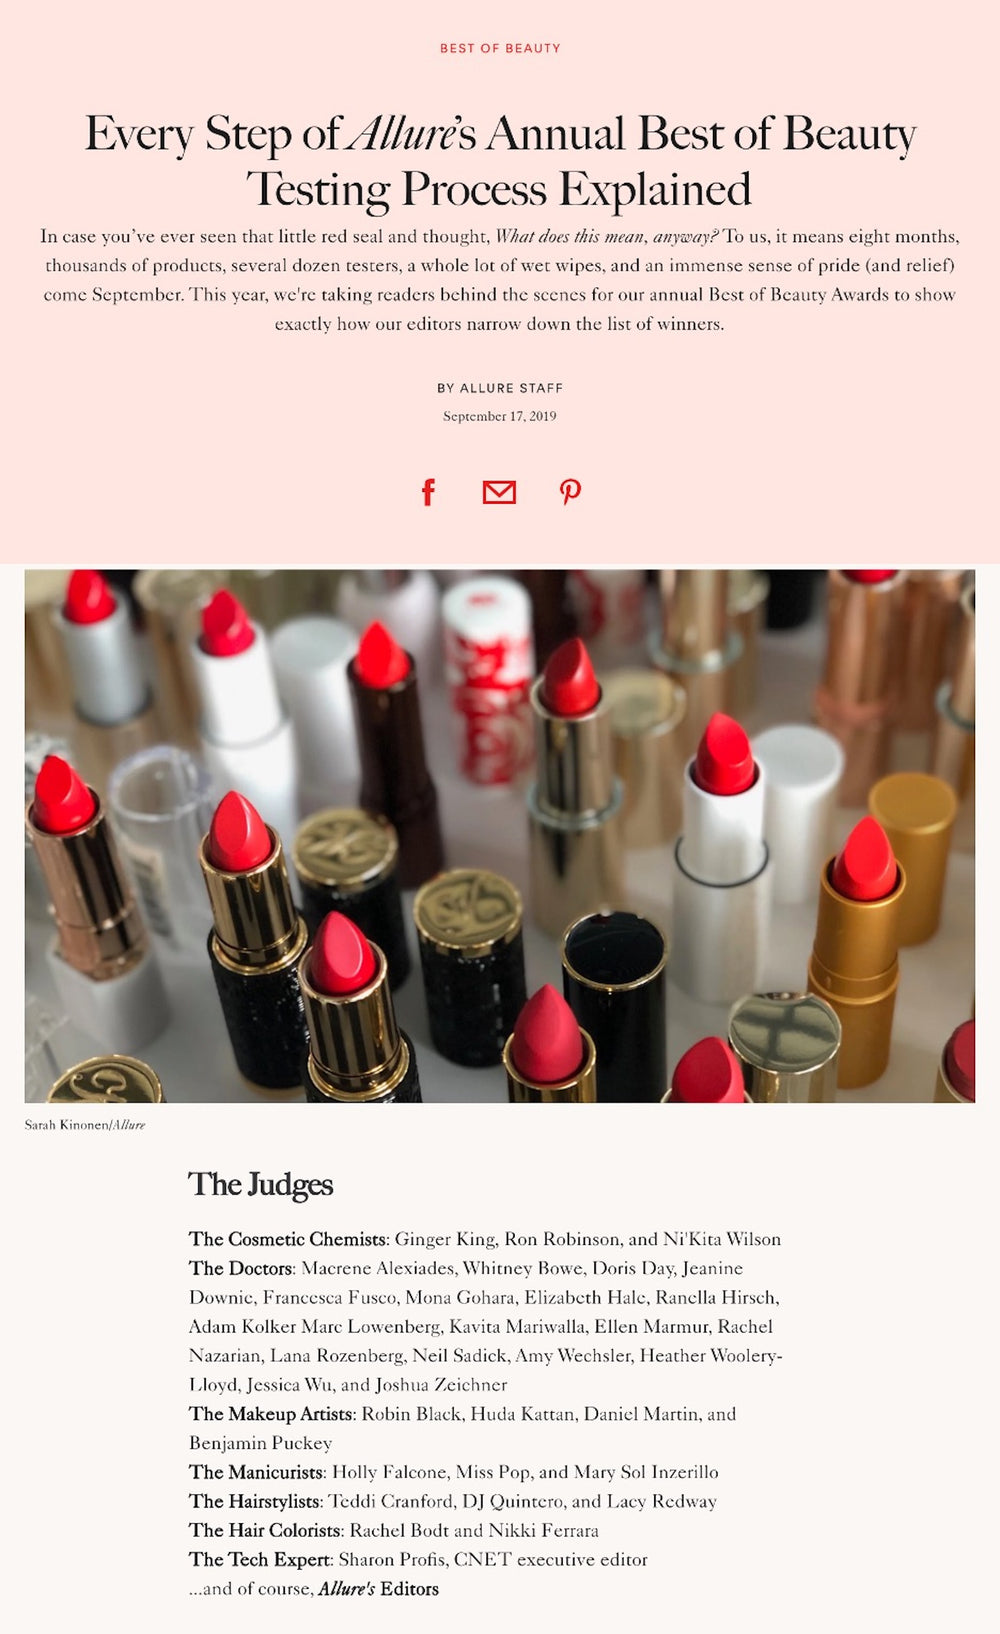 Allure: Every Step of Allure’s Annual Best of Beauty Testing Process Explained